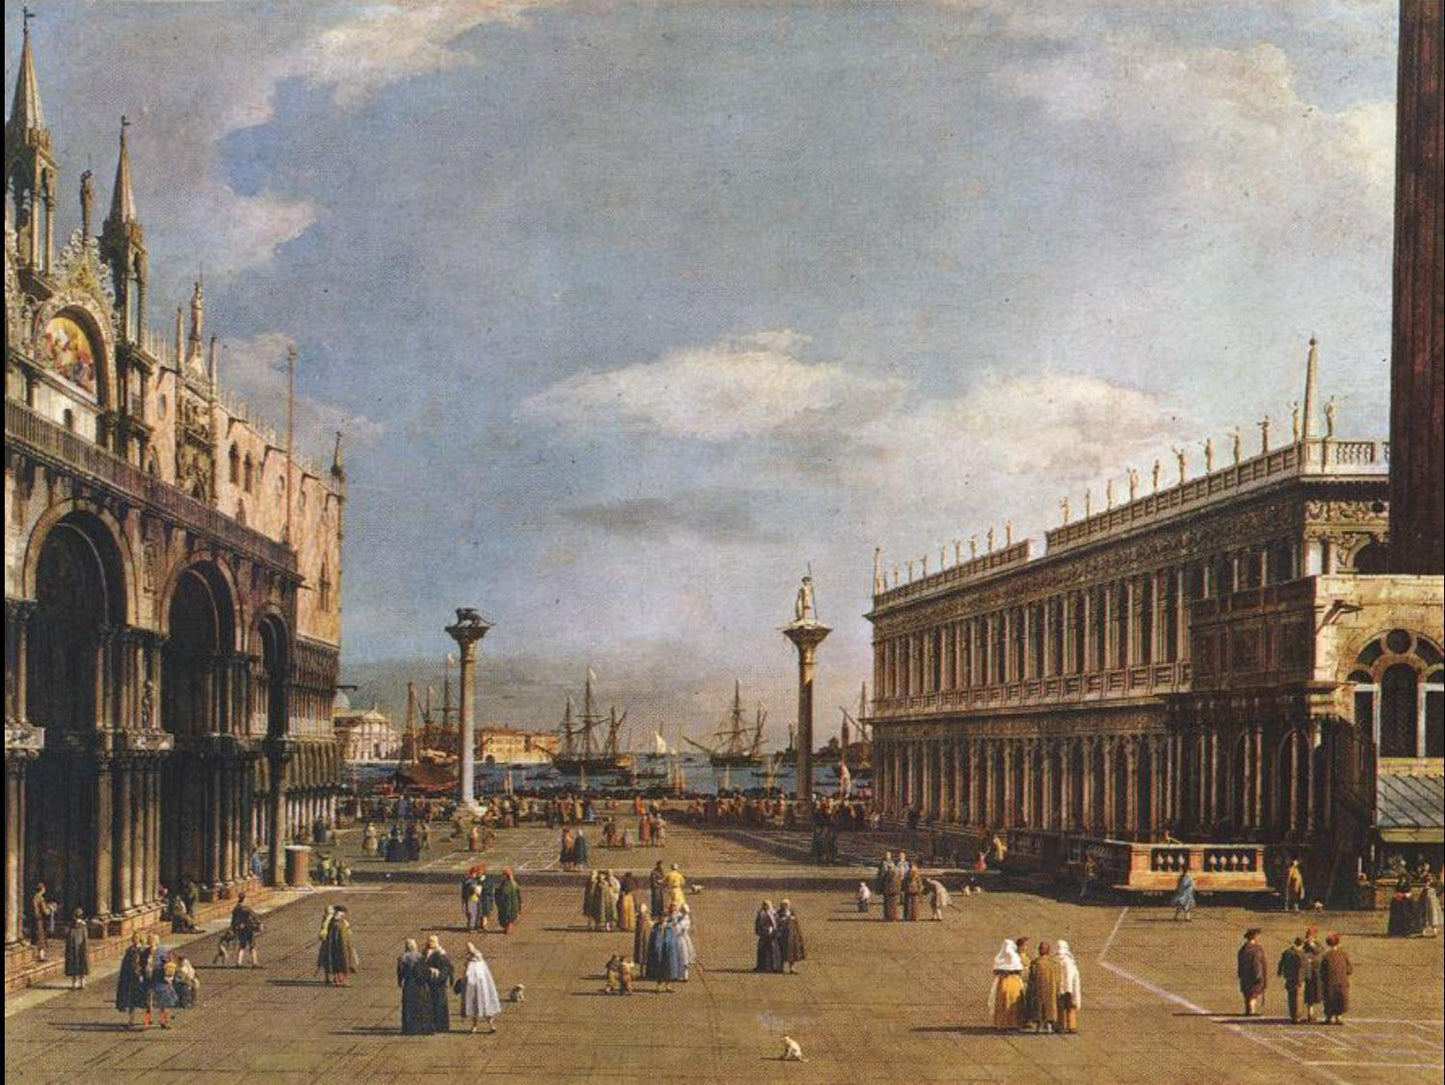 The Piazzetta, Canaletto